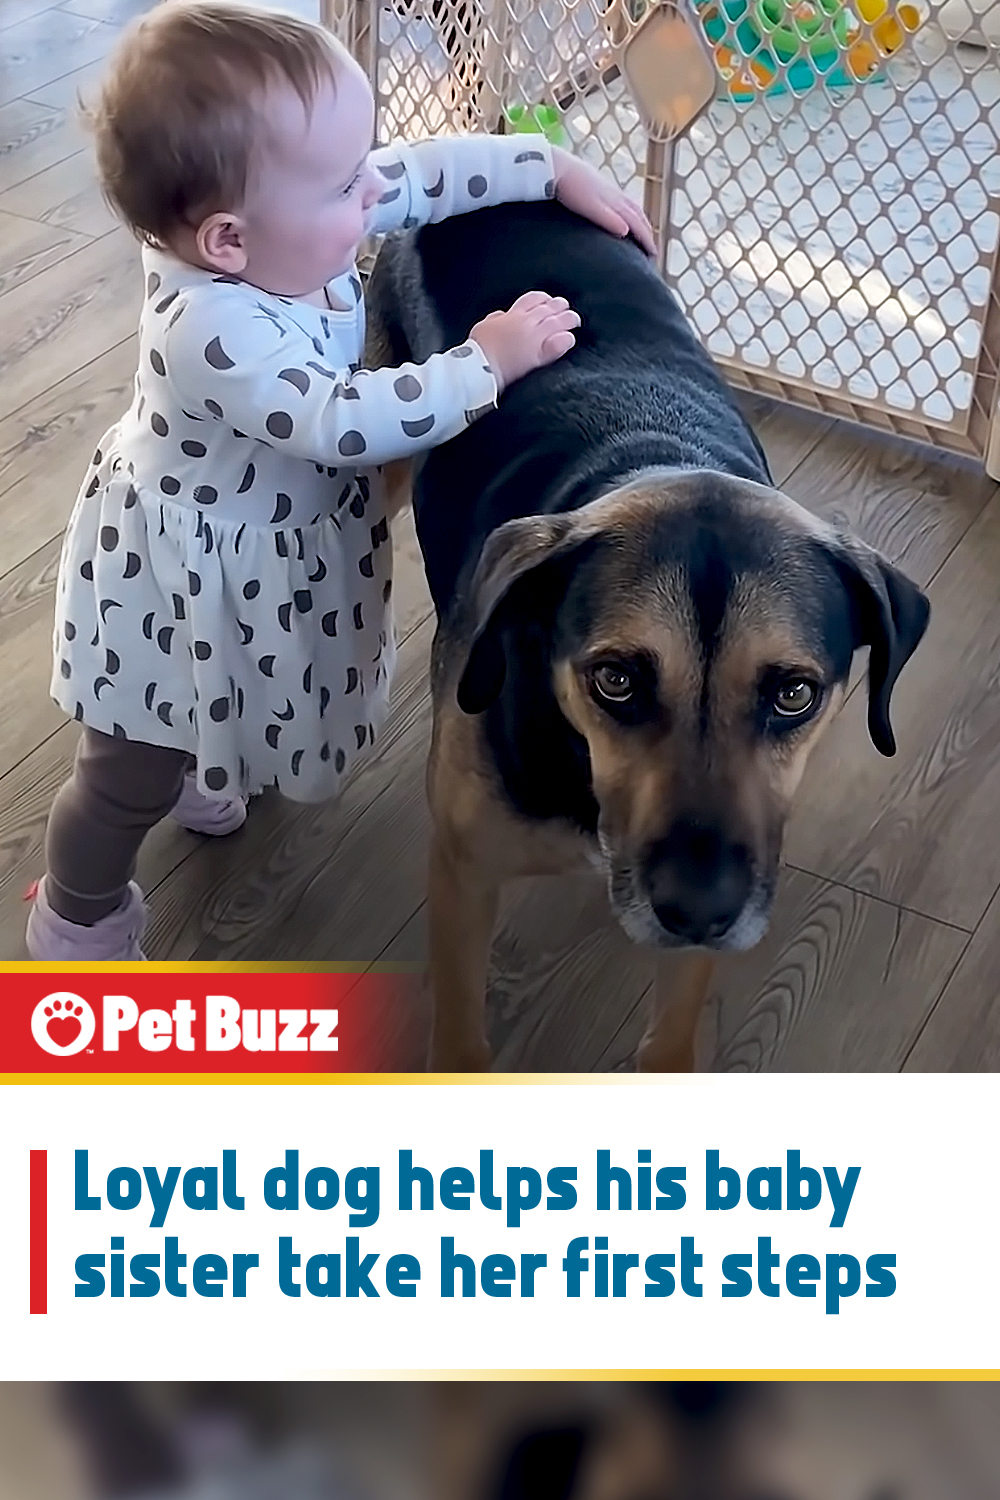 Loyal dog helps his baby sister take her first steps